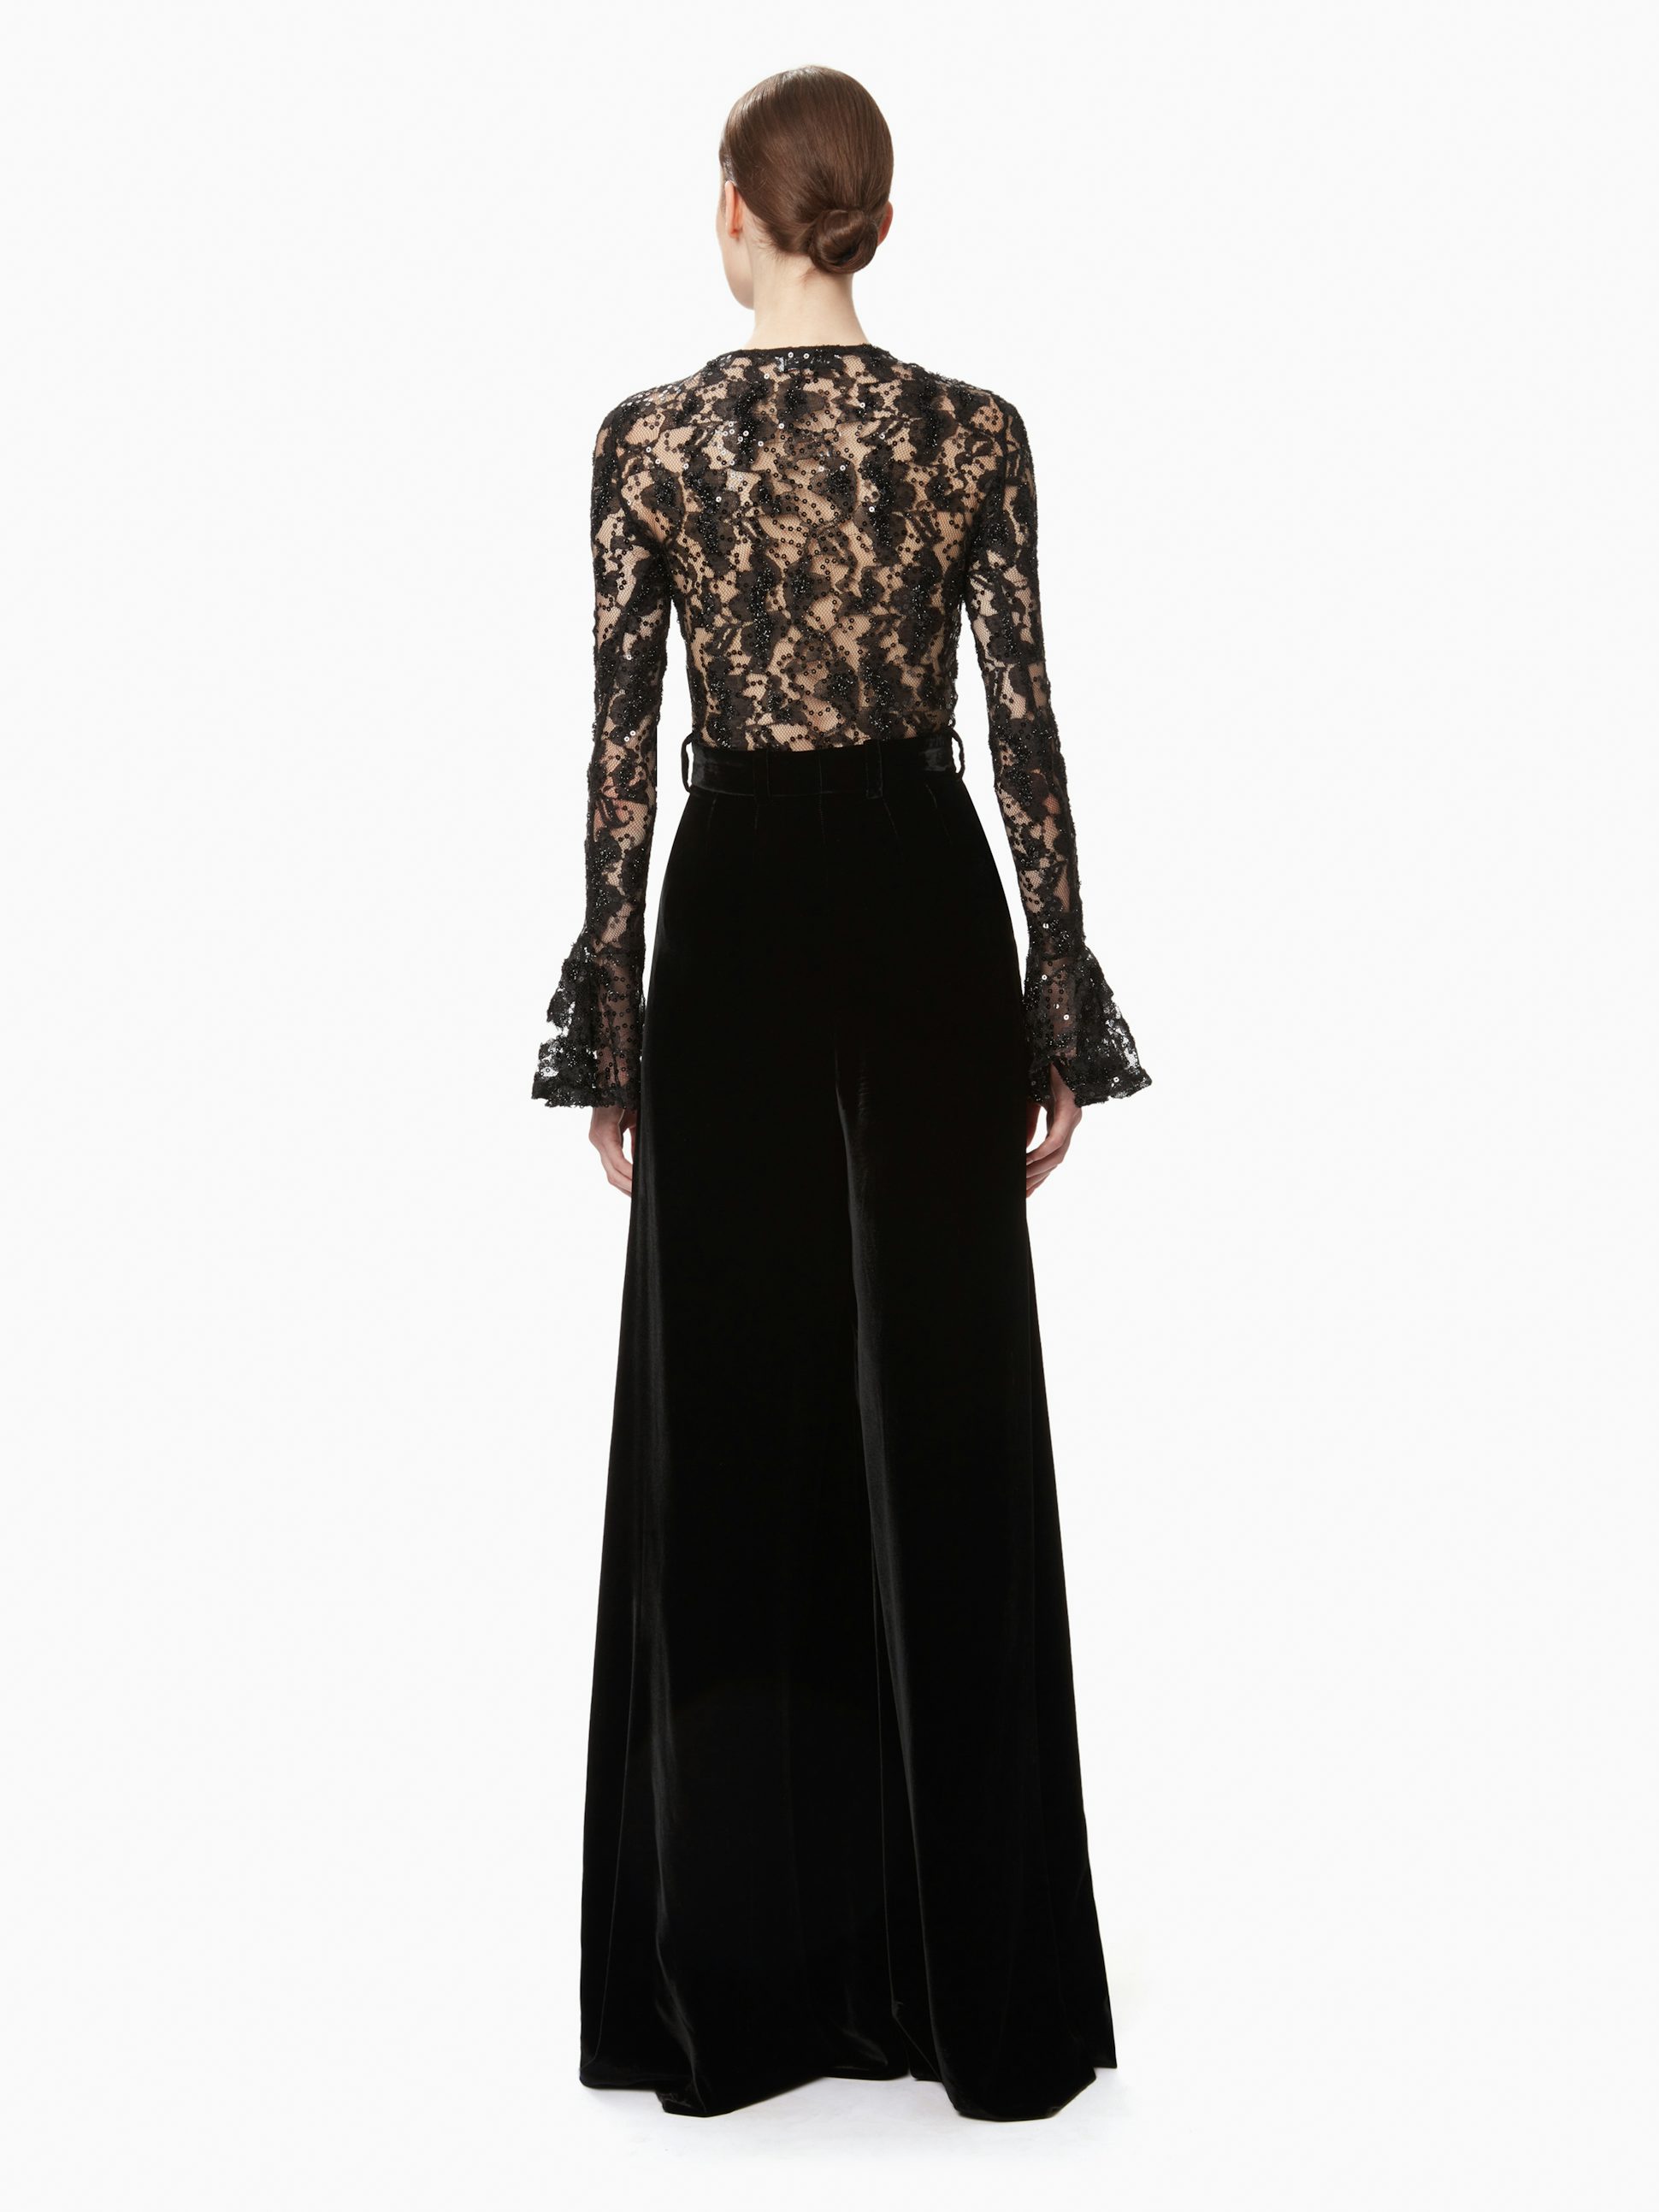 Sequin lace cut-out top in black - Nina Ricci